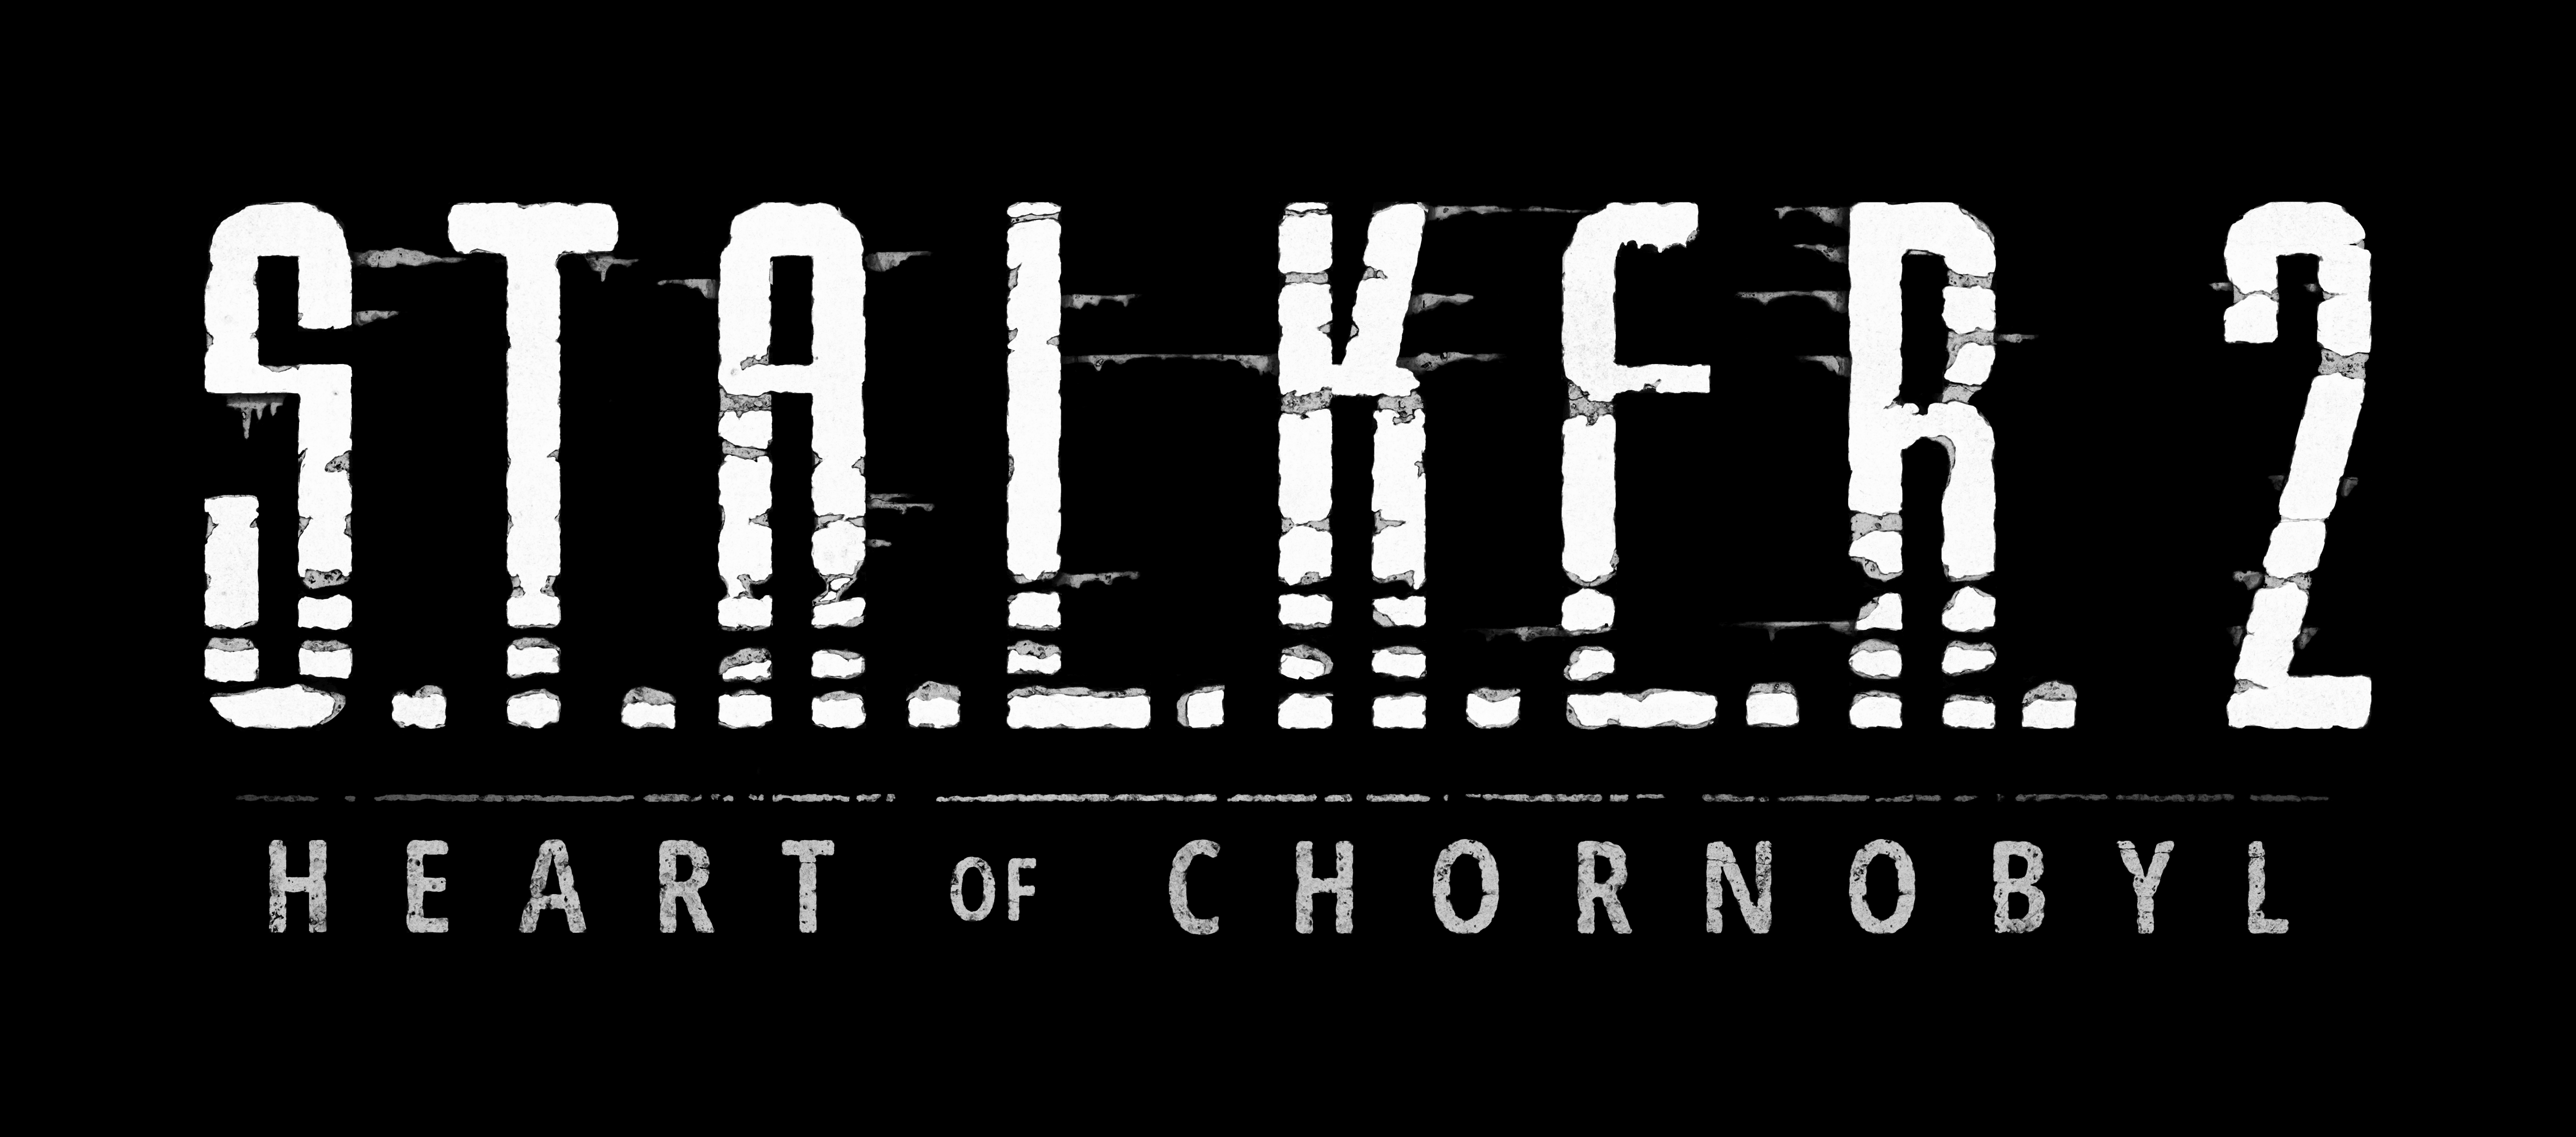 A demo version of the game S.T.A.L.K.E.R. 2 will be available at